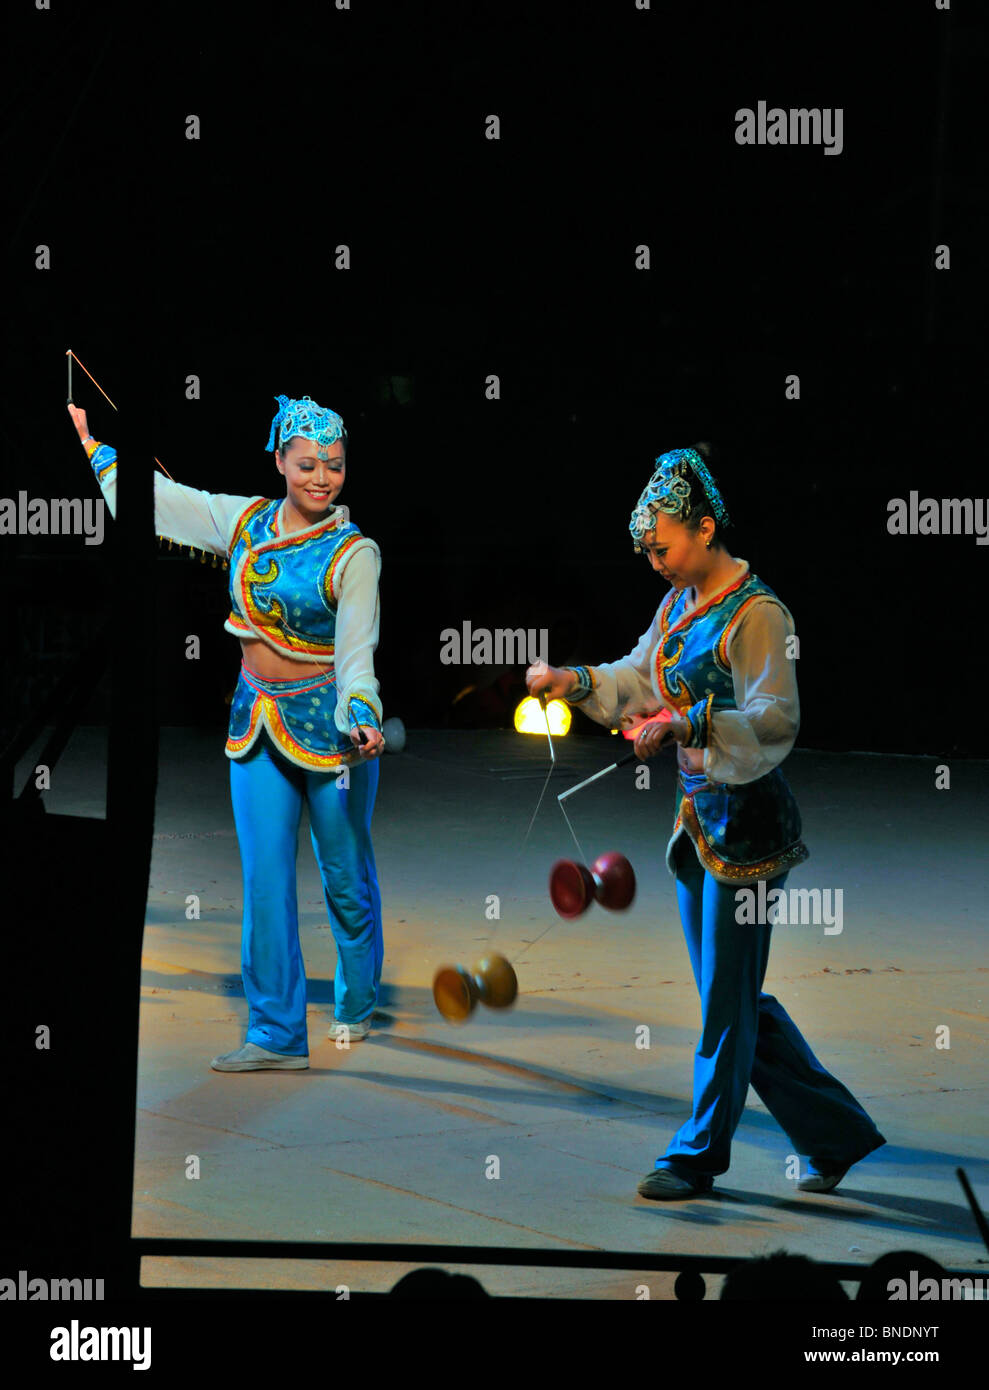 Chinese circus performers skillfully play with diabolos - Chinese wooden  spinning tops. Stock Photo